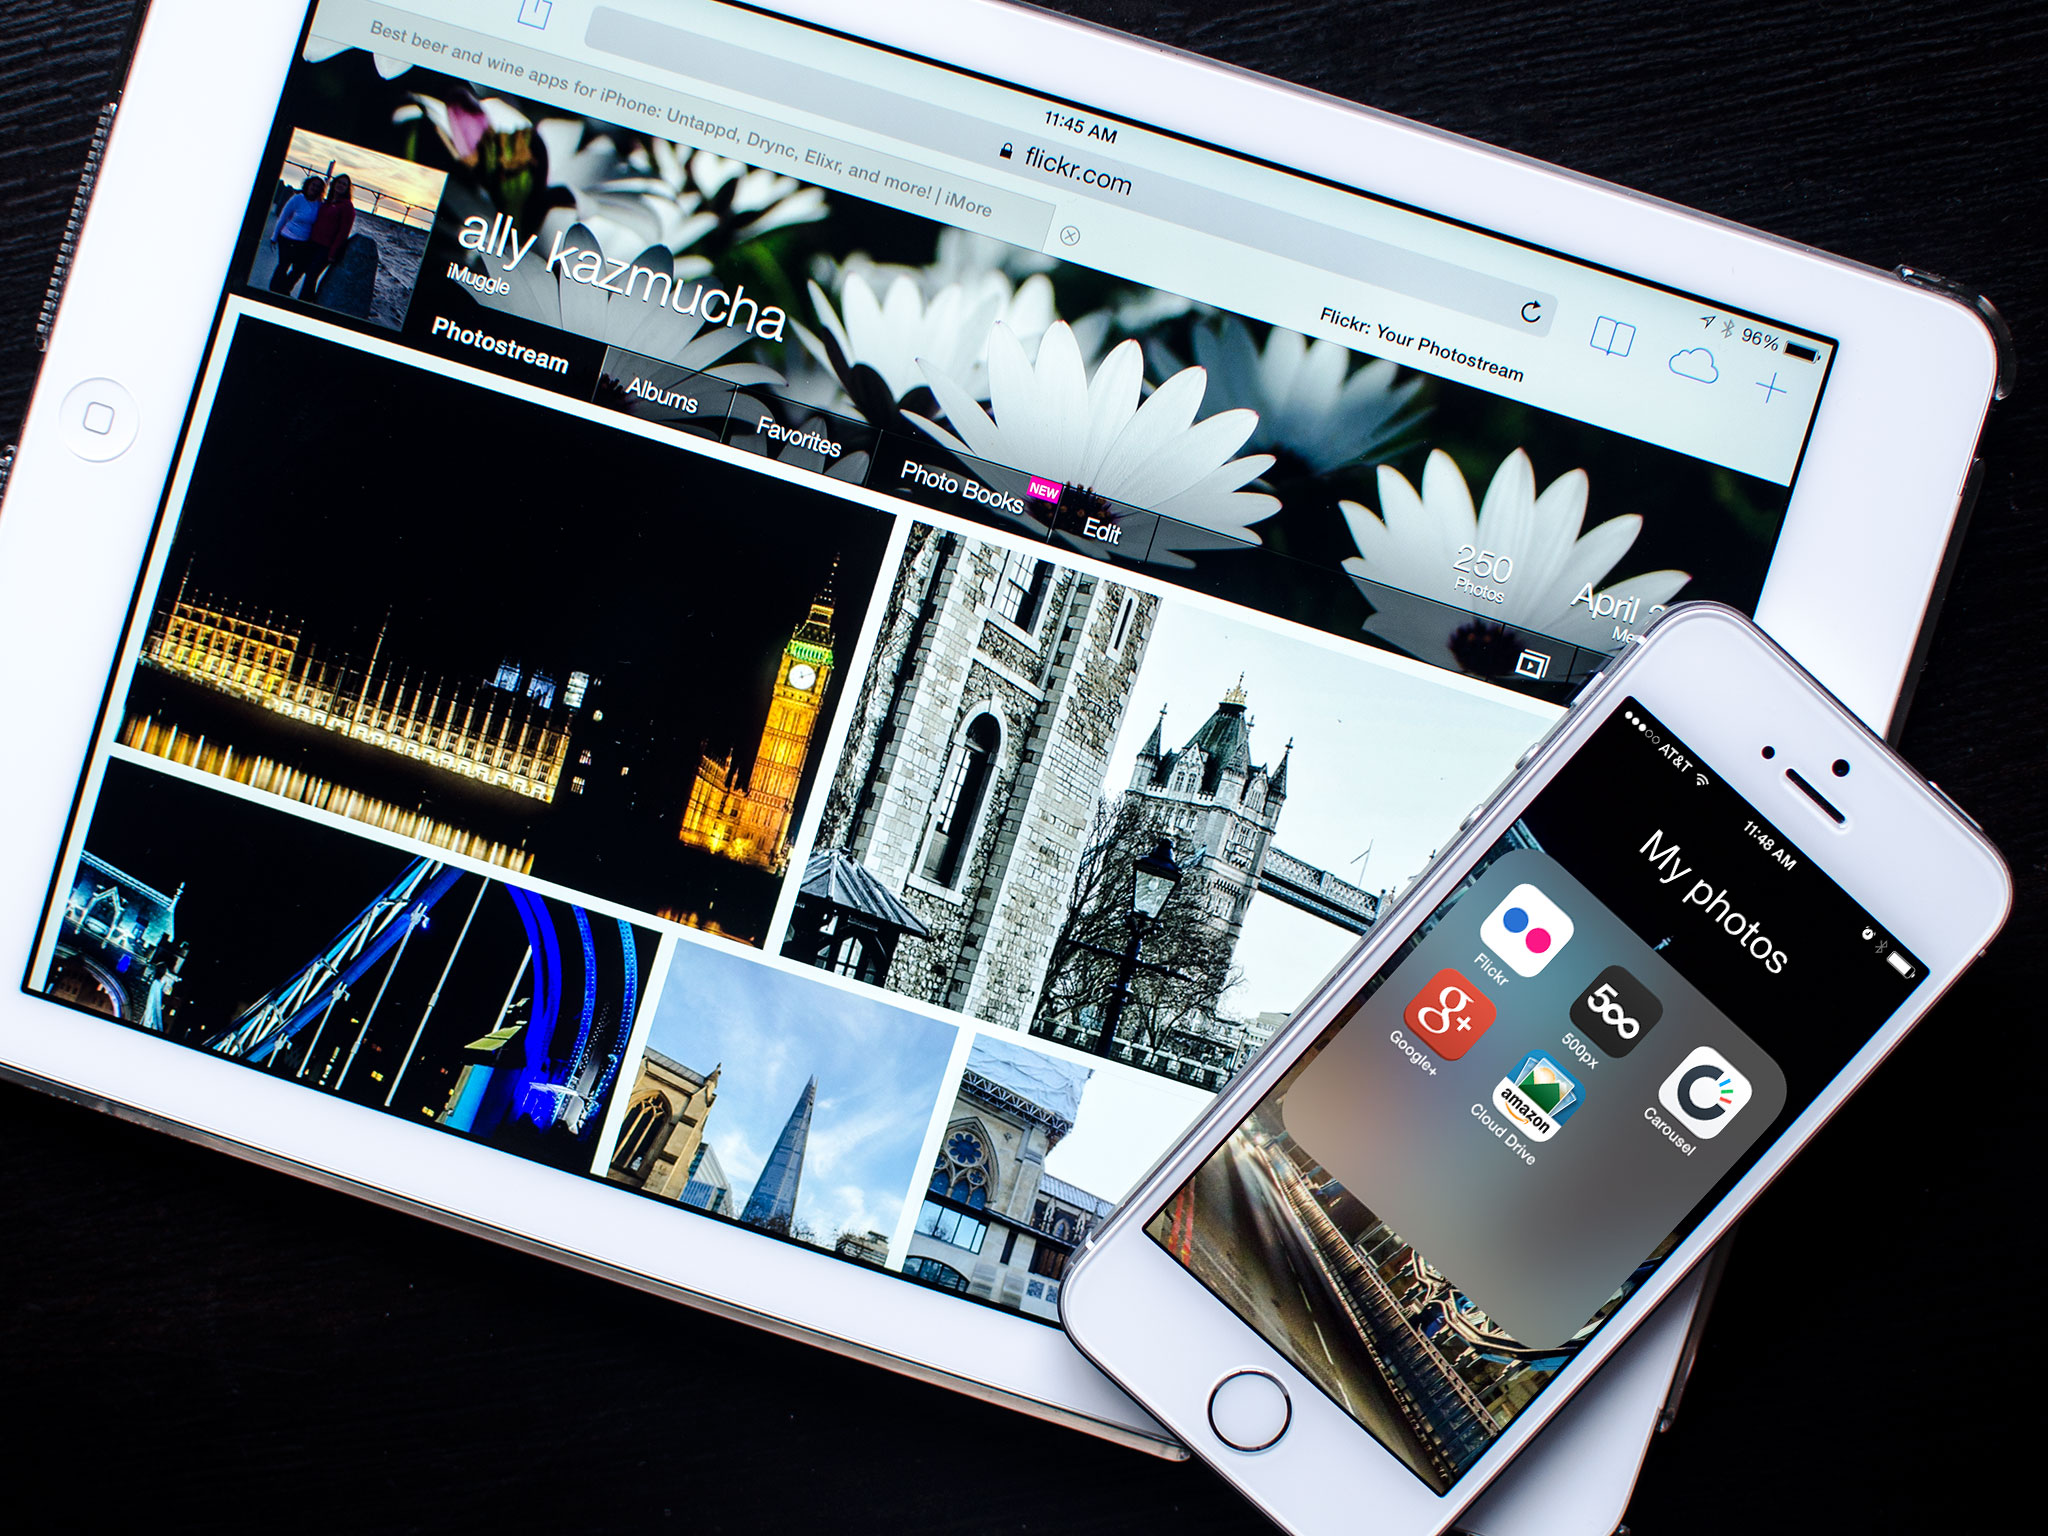 Best photo and video storage apps for iPhone and iPad: Flickr, Dropbox, 500px, and more!